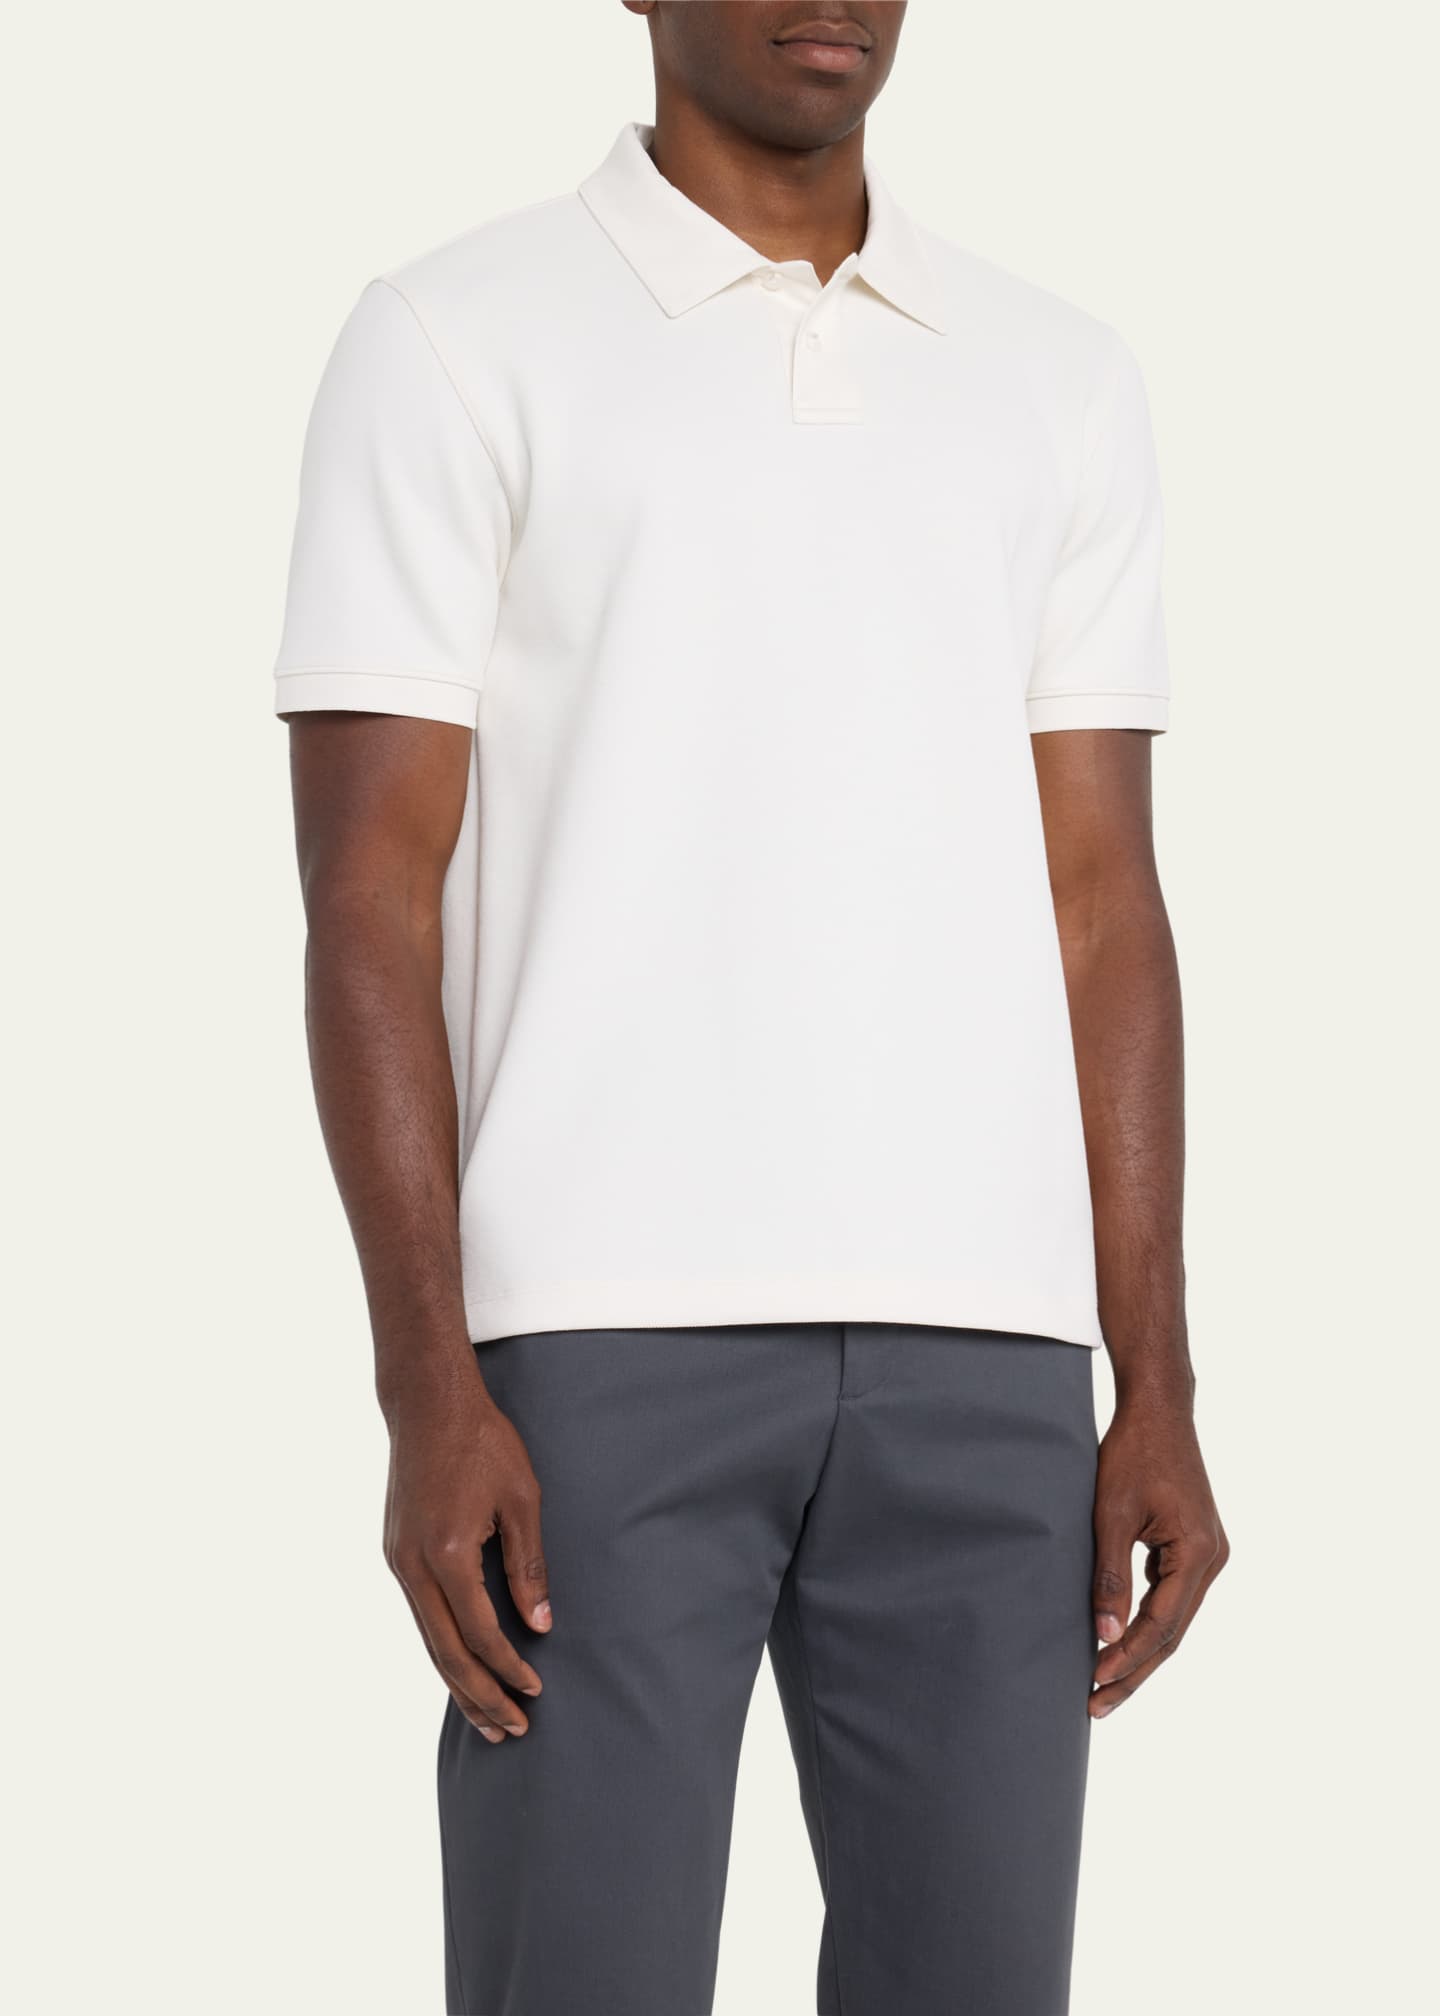 Theory Men's Delroy Solid Polo Shirt - Bergdorf Goodman